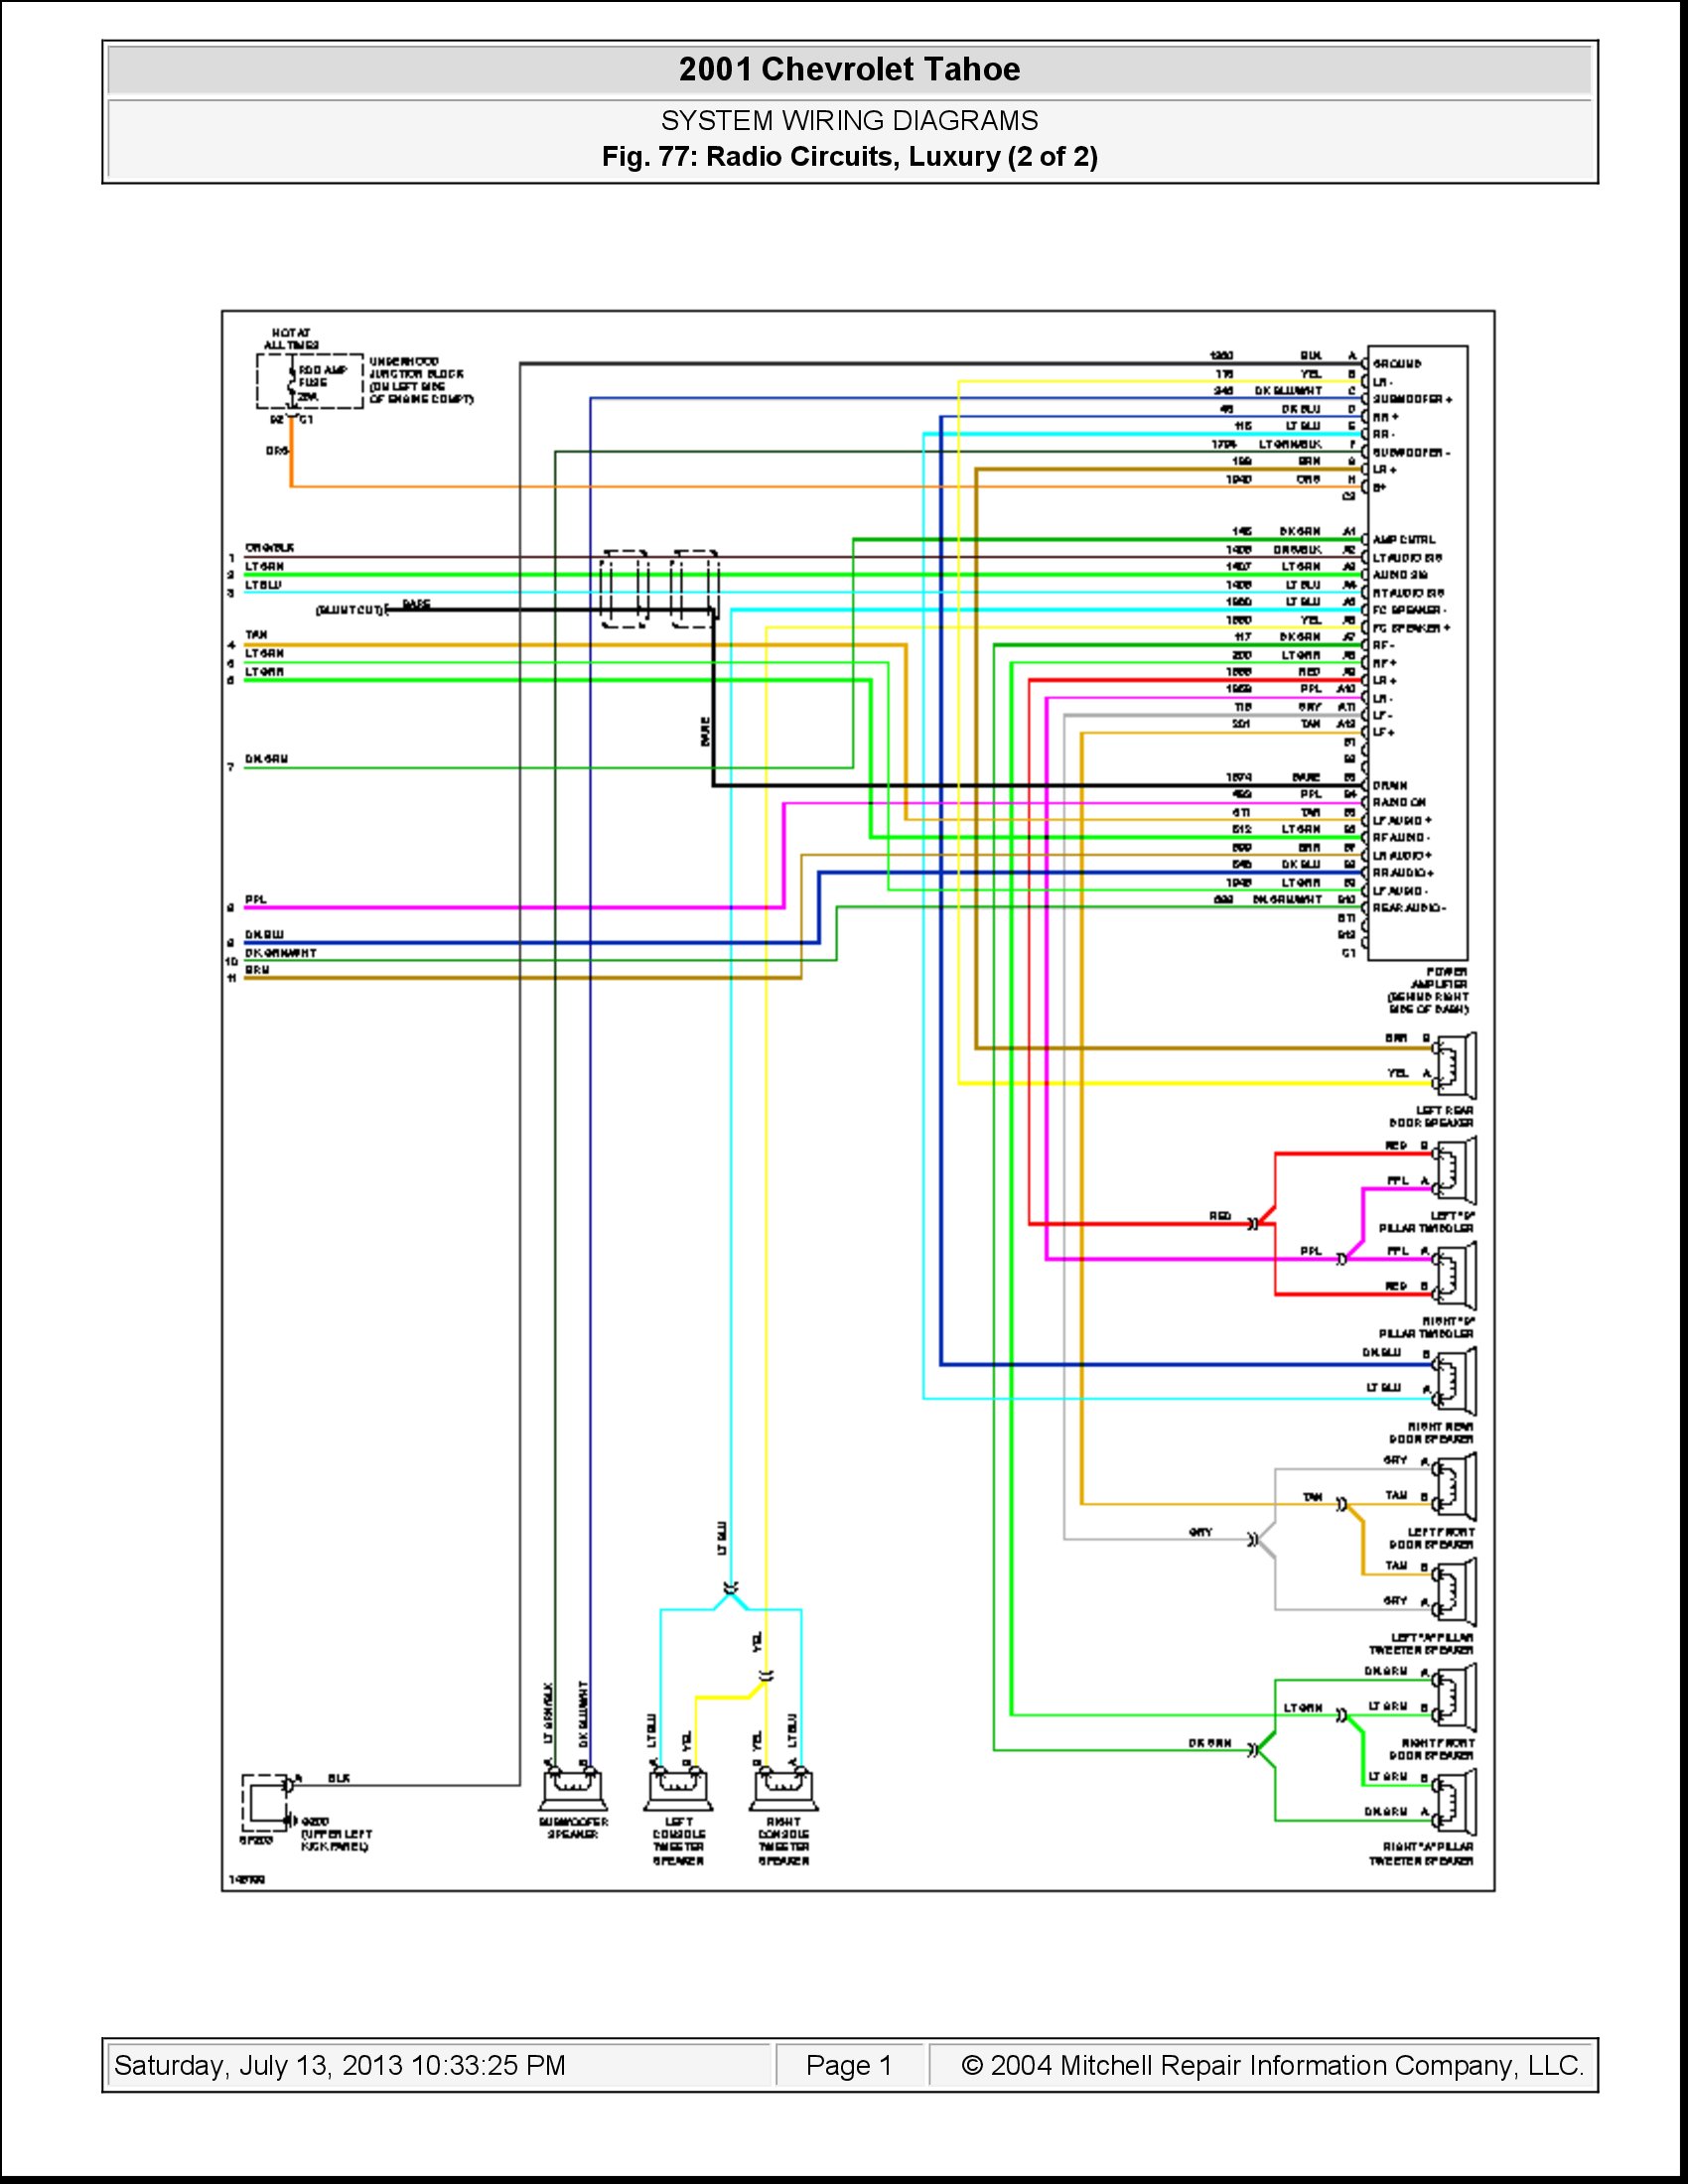 2005 Chevy Avalanche Radio Wiring Diagram from wiringall.com